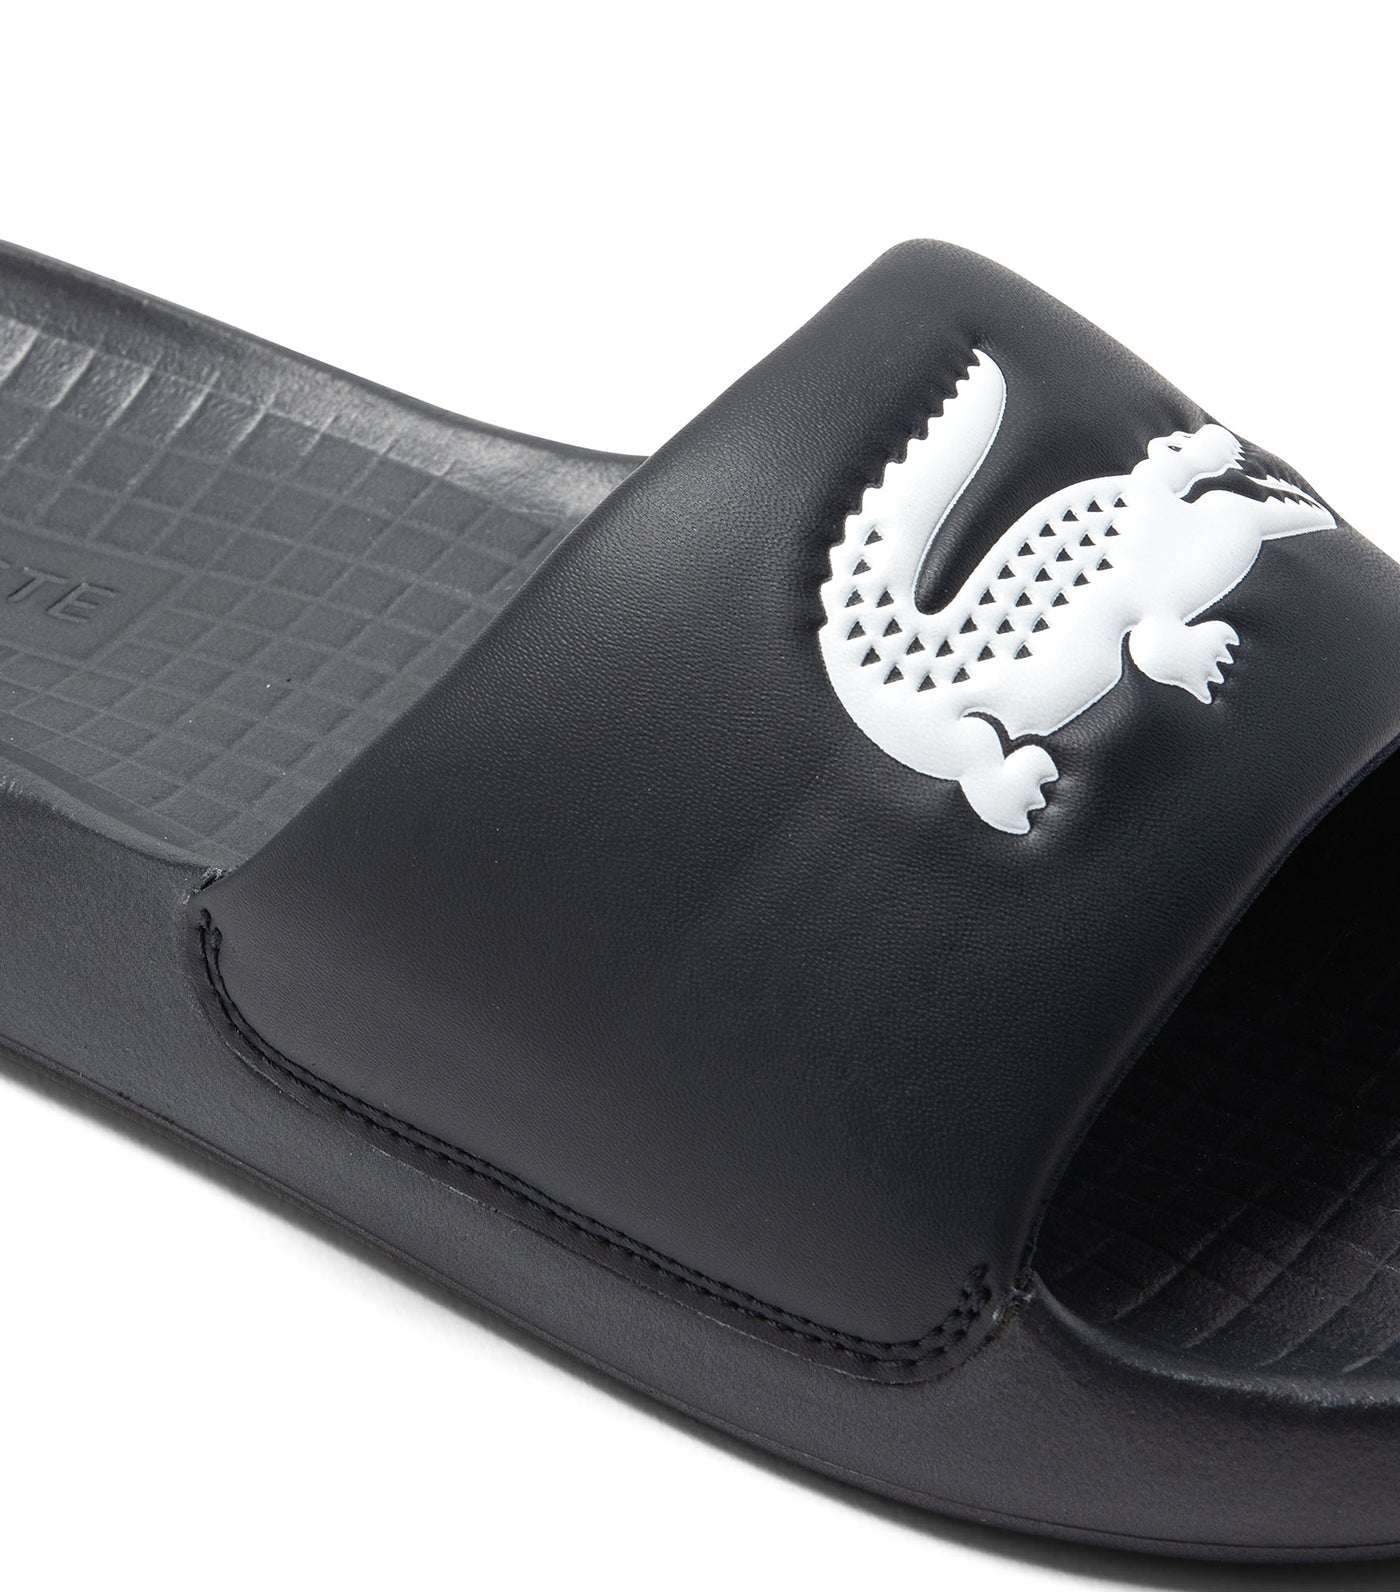 Men's Lacoste Croco 1.0 Synthetic Slides Navy/White